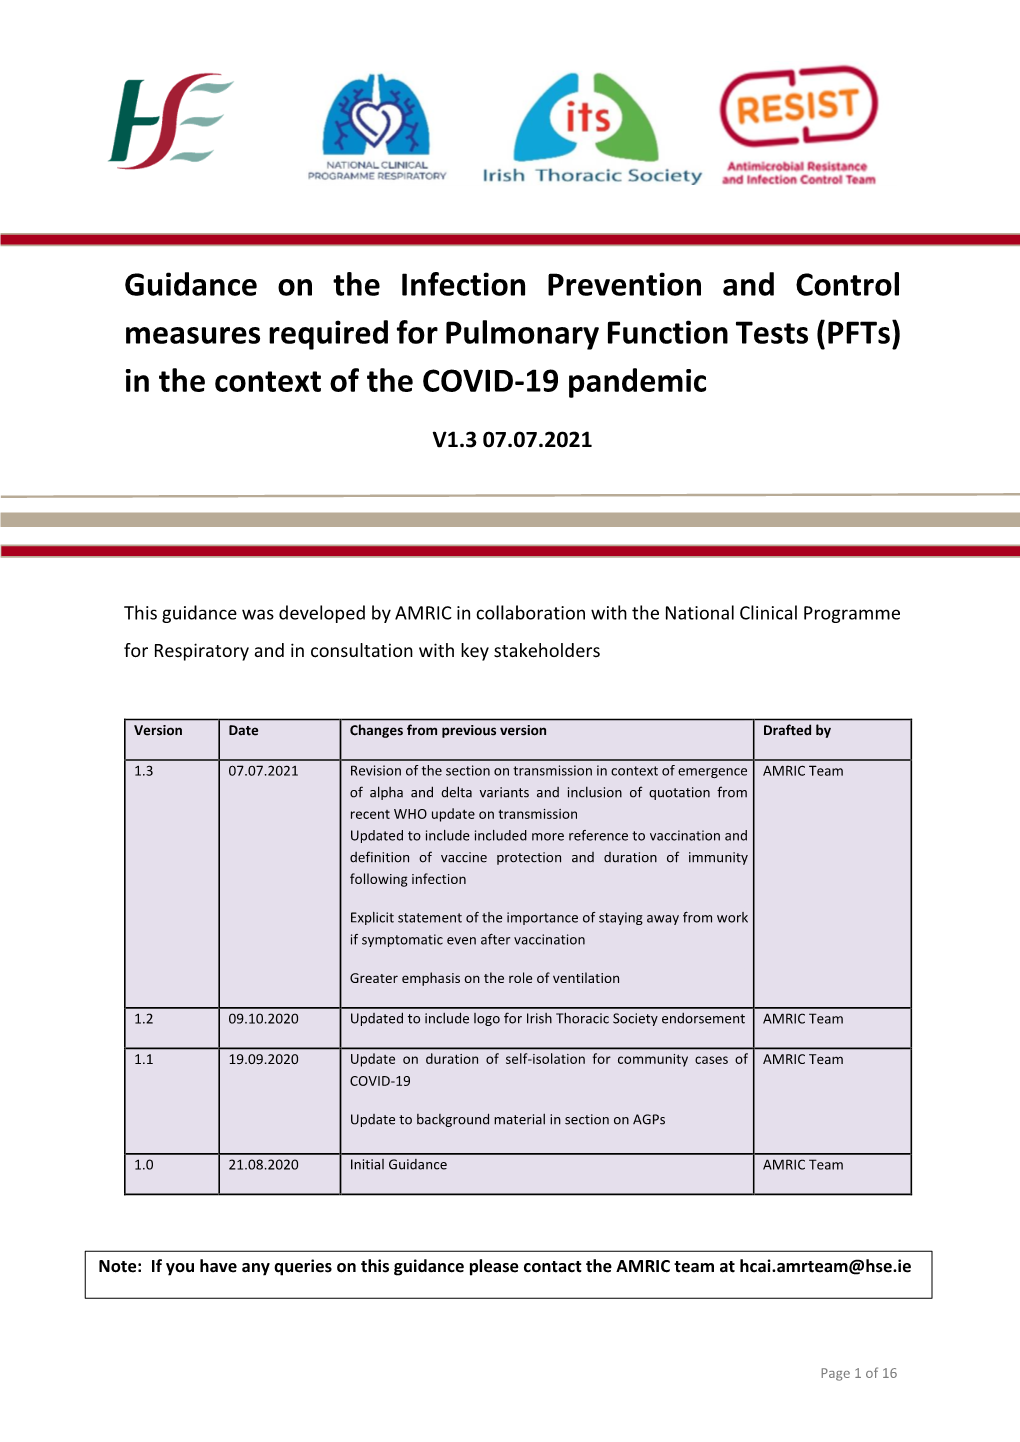 Guidance on the Infection Prevention and Control Measures Required for Pulmonary Function Tests (Pfts) in the Context of the COVID-19 Pandemic